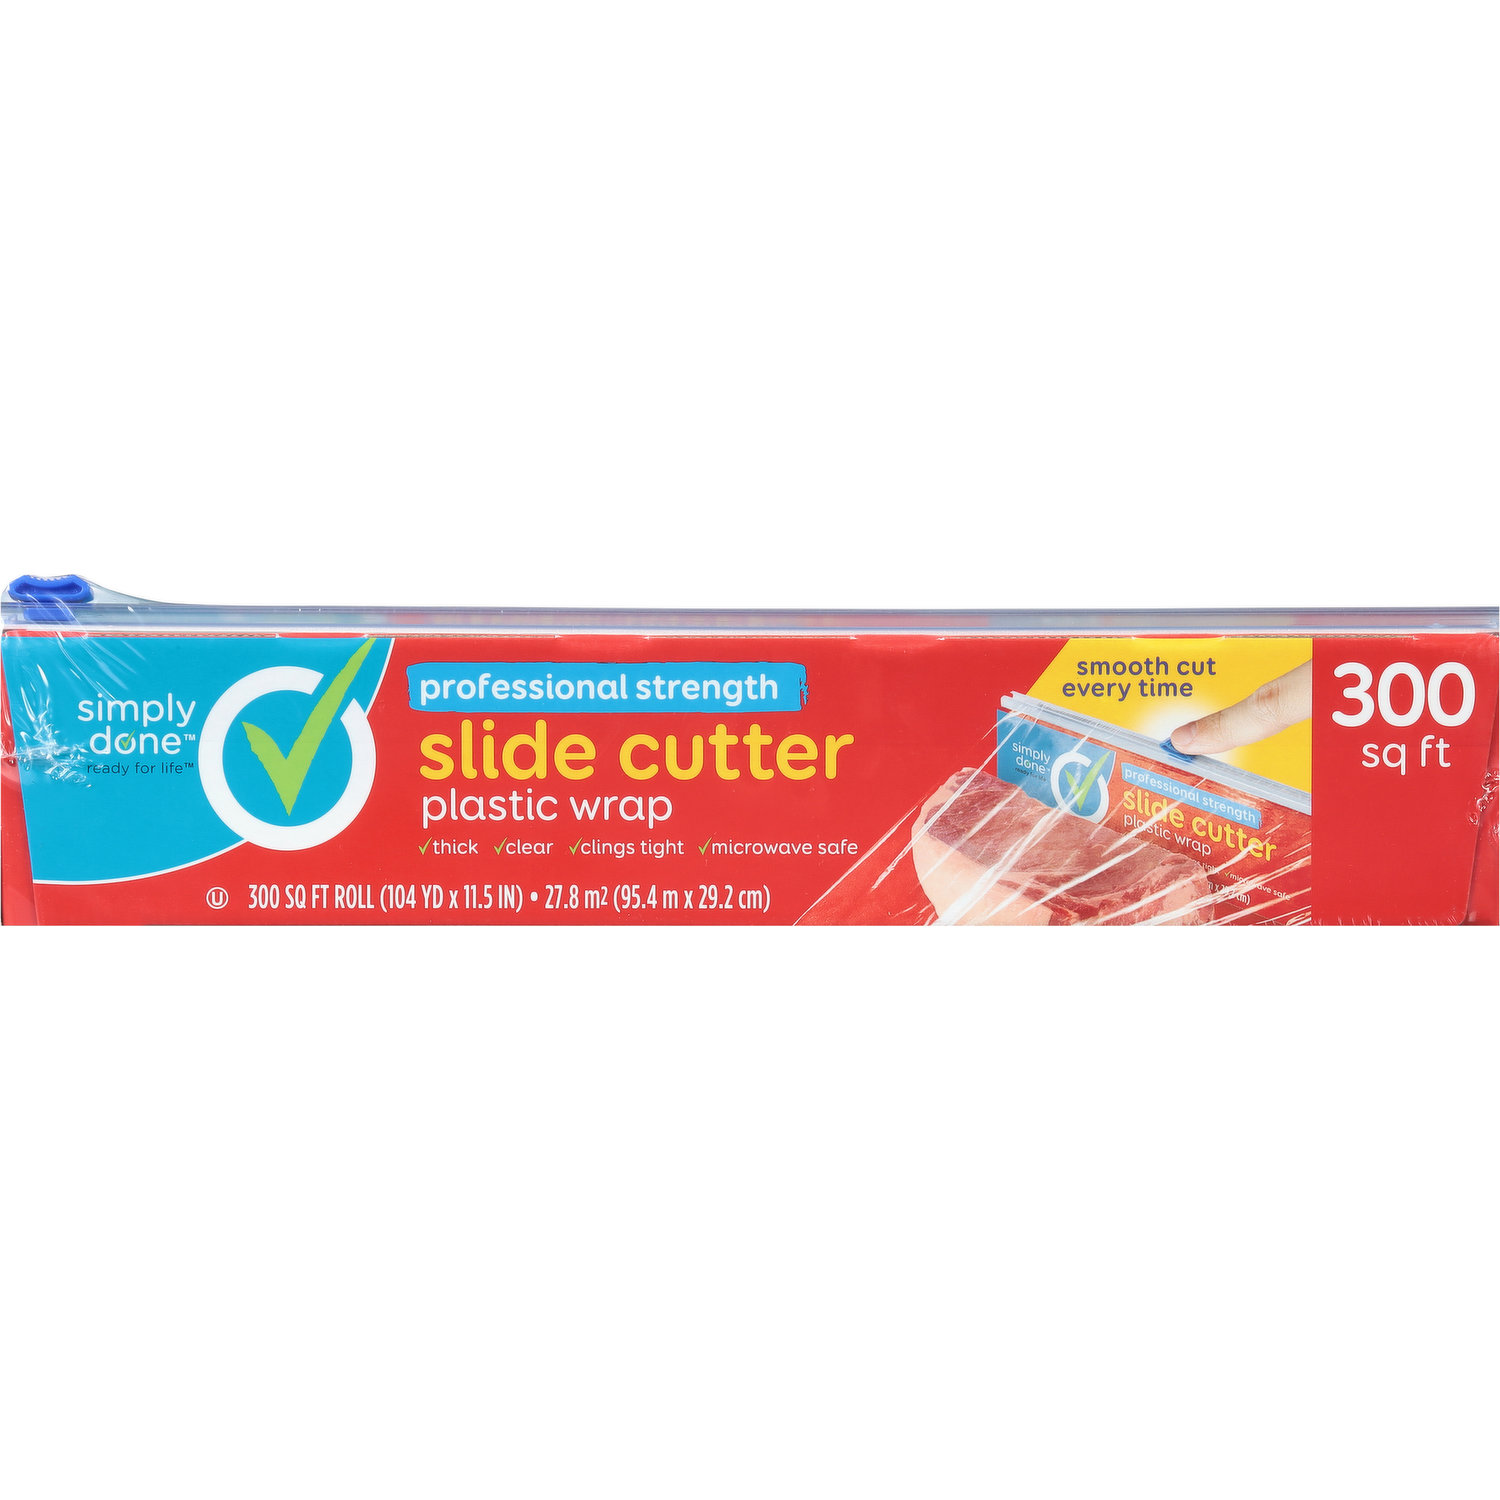 17661 - Slide Cutter - Four 13.5 Stick On replacements for 12 plastic  wrap - Fits many commercial kitchen boxes - Save time and money, measure  your